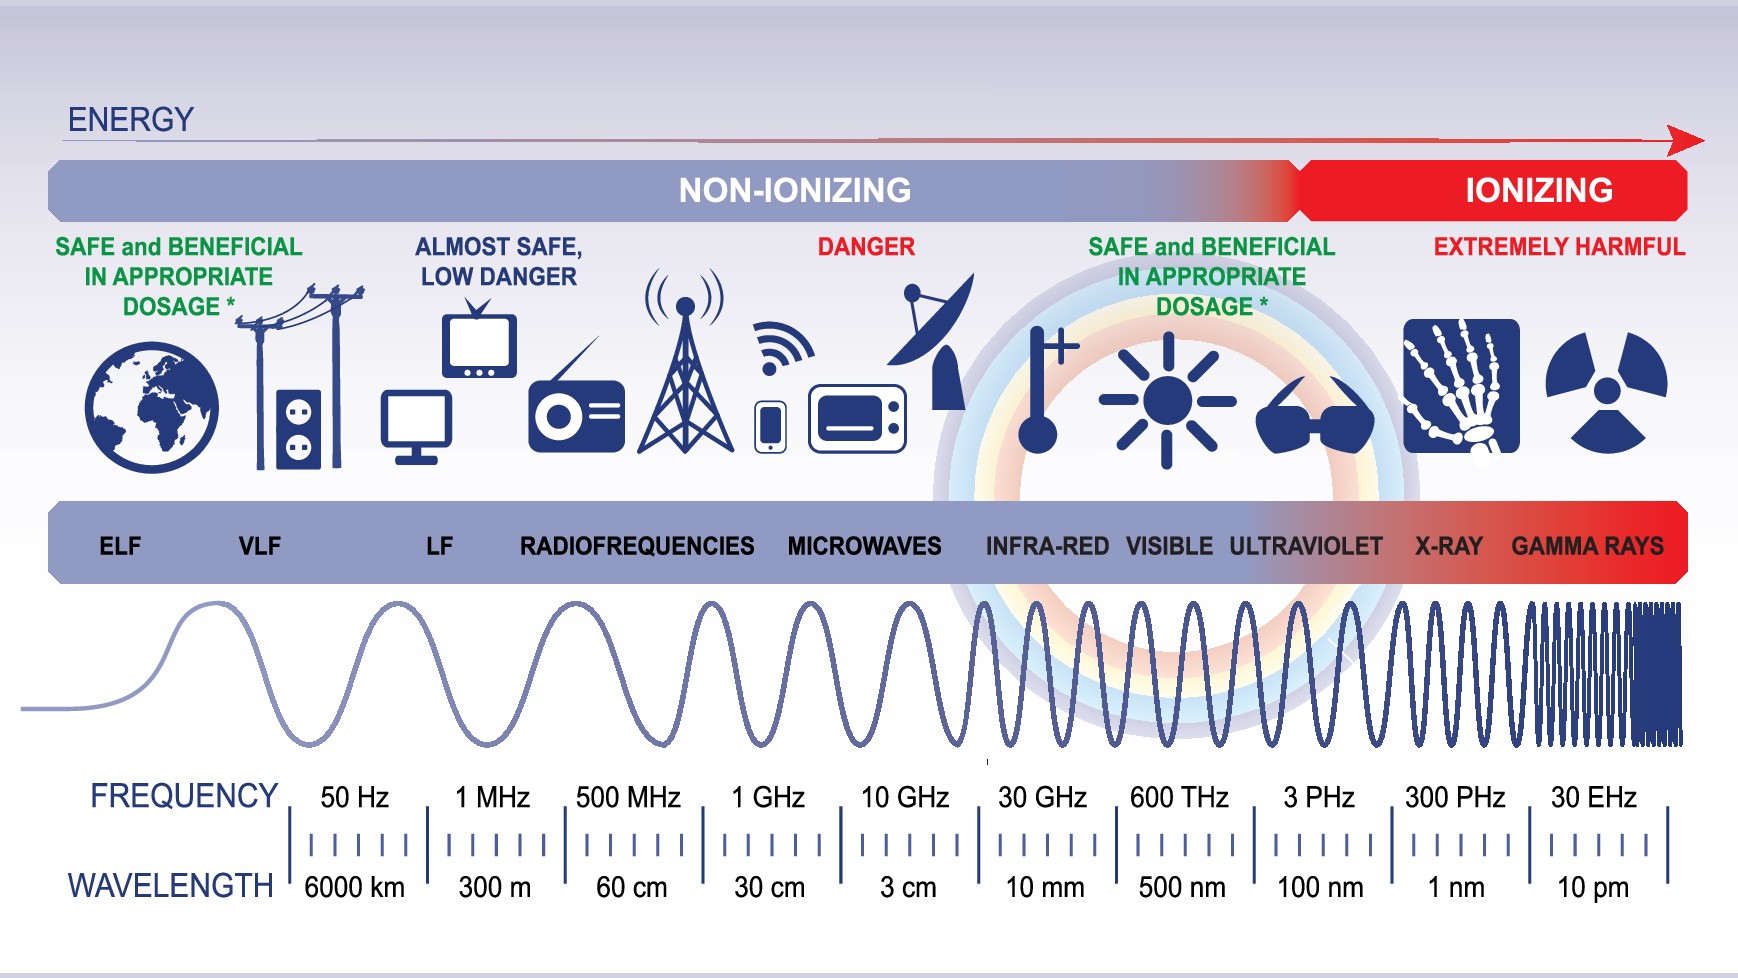 Illustration showing the electromagnetic spectrum. From left to right: non-ionizing energy (ELF, VLF, LF, radio frequencies, infra-red visible, ultraviolet) to ionizing (ultraviolet, x-ray, gamma rays).